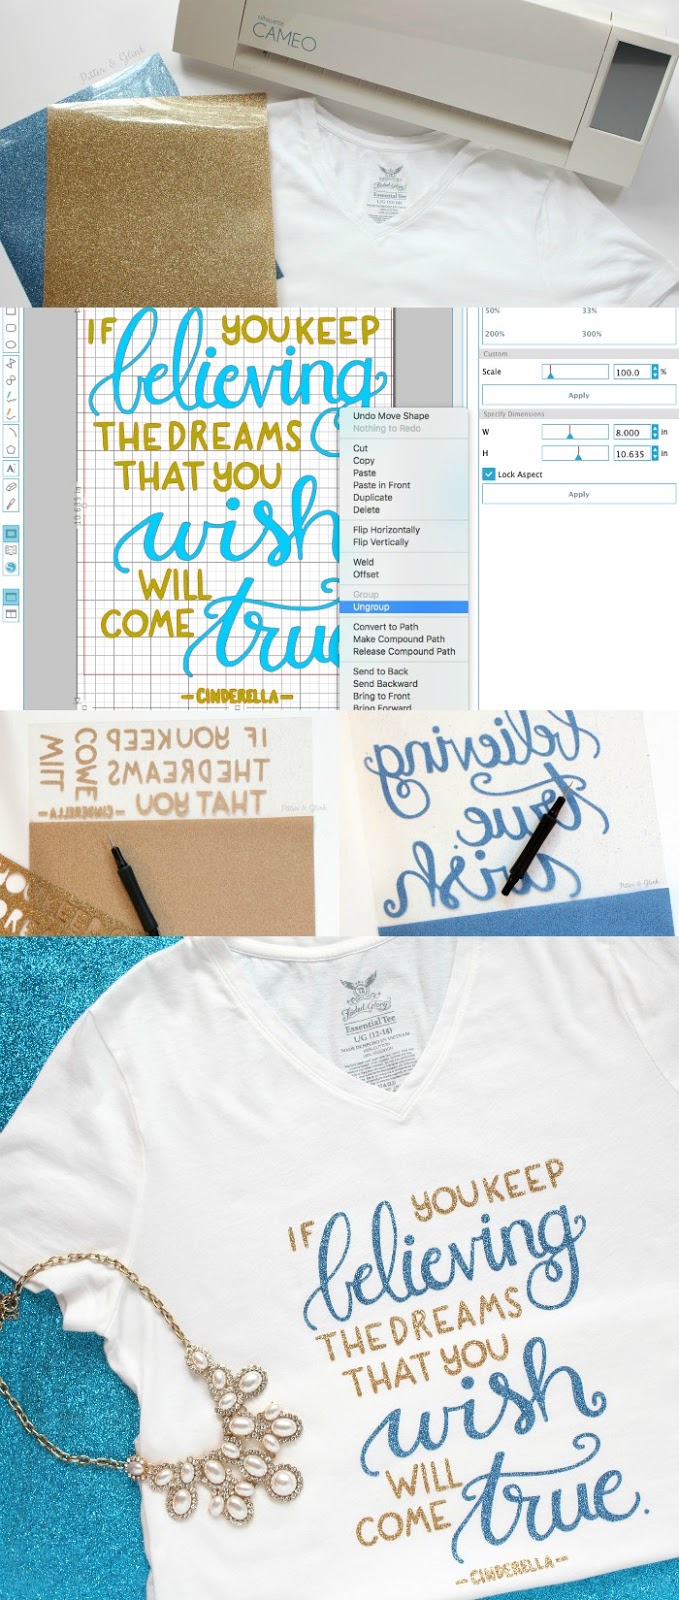 DIY Glittery, Hand-Lettered Cinderella Quote Tee